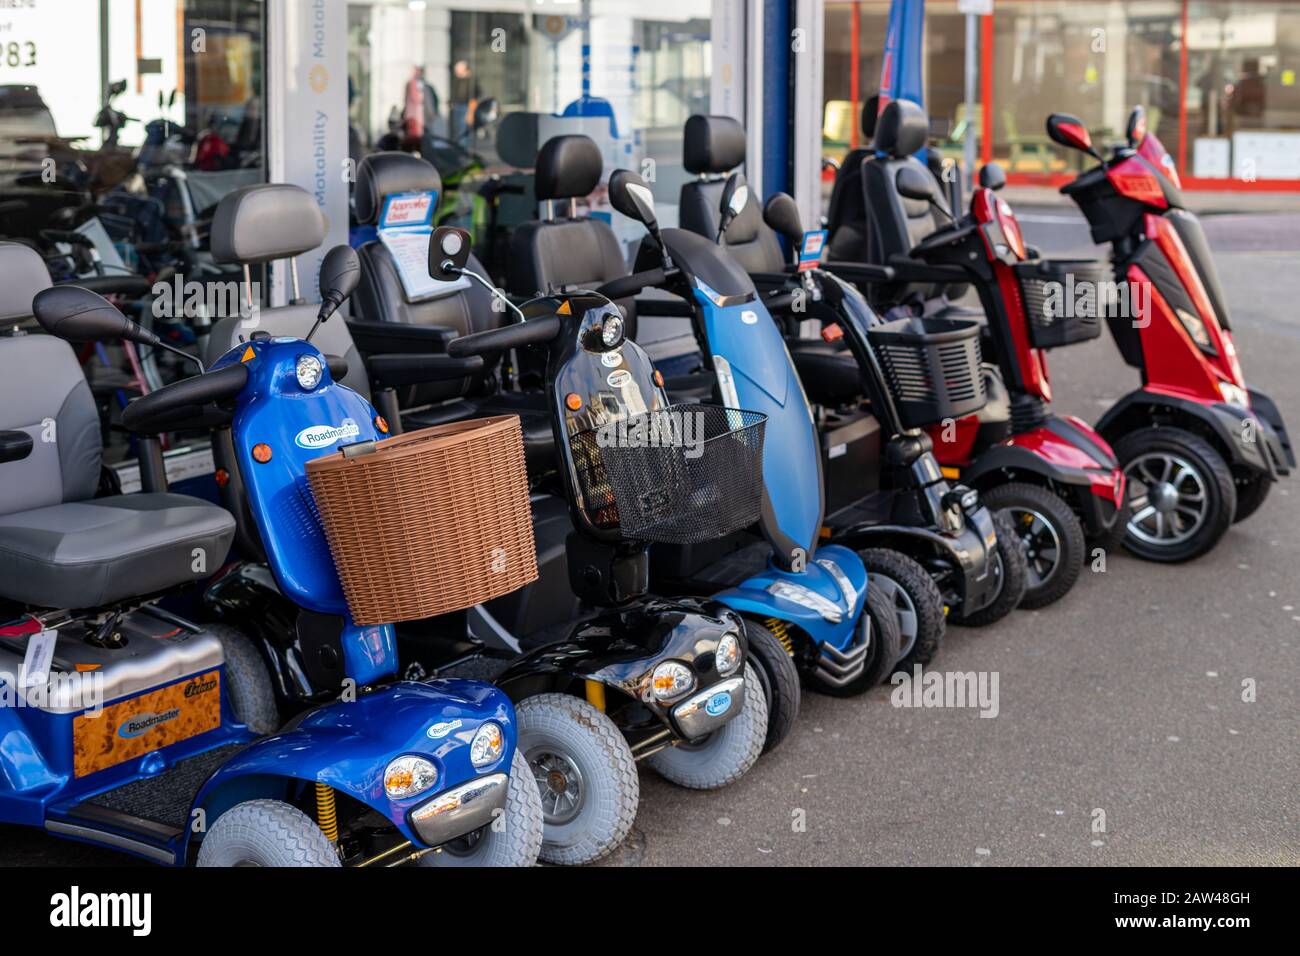 A row of mobility scooters or disability scooters outside a shop on sale Stock Photo